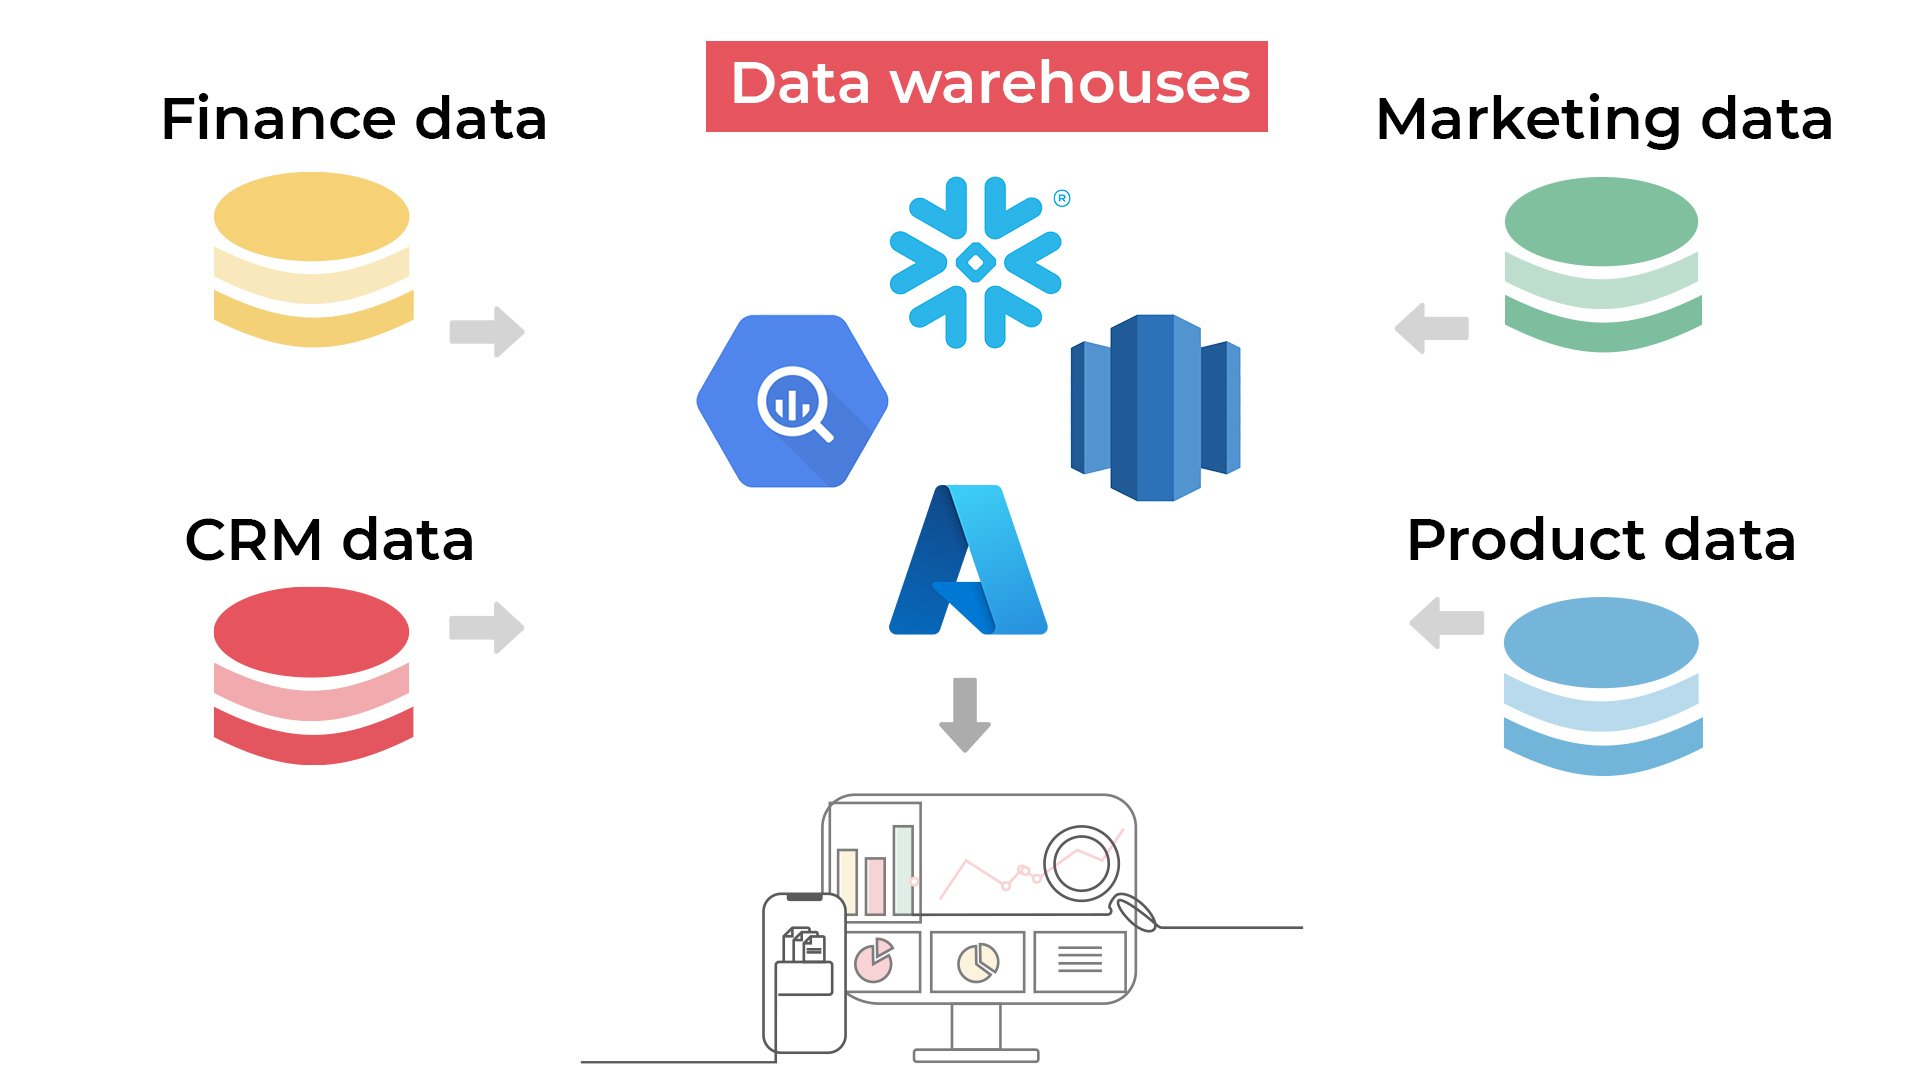 Illustration showing how data warehouses like BigQuery, S3, Azure and Snowflake collect all business data in one place